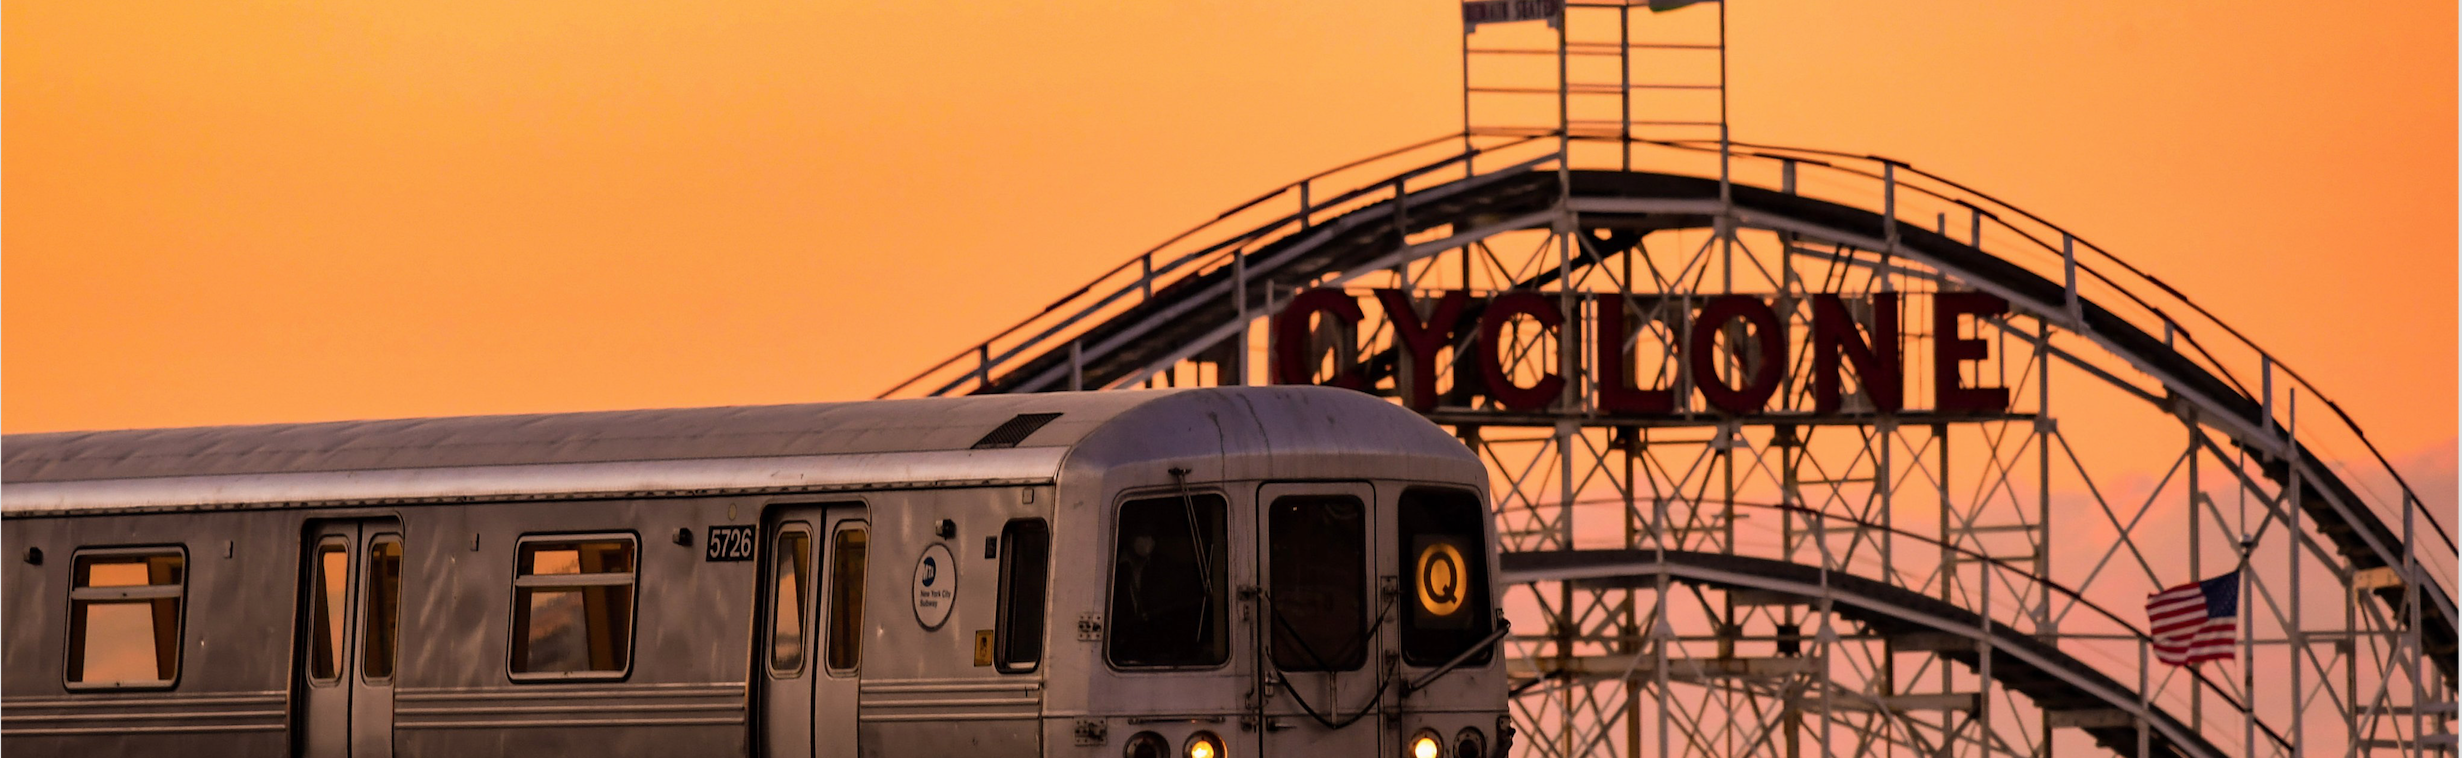 Q train passing the wooden Cyclone roller coaster during orange Coney Island sunsent